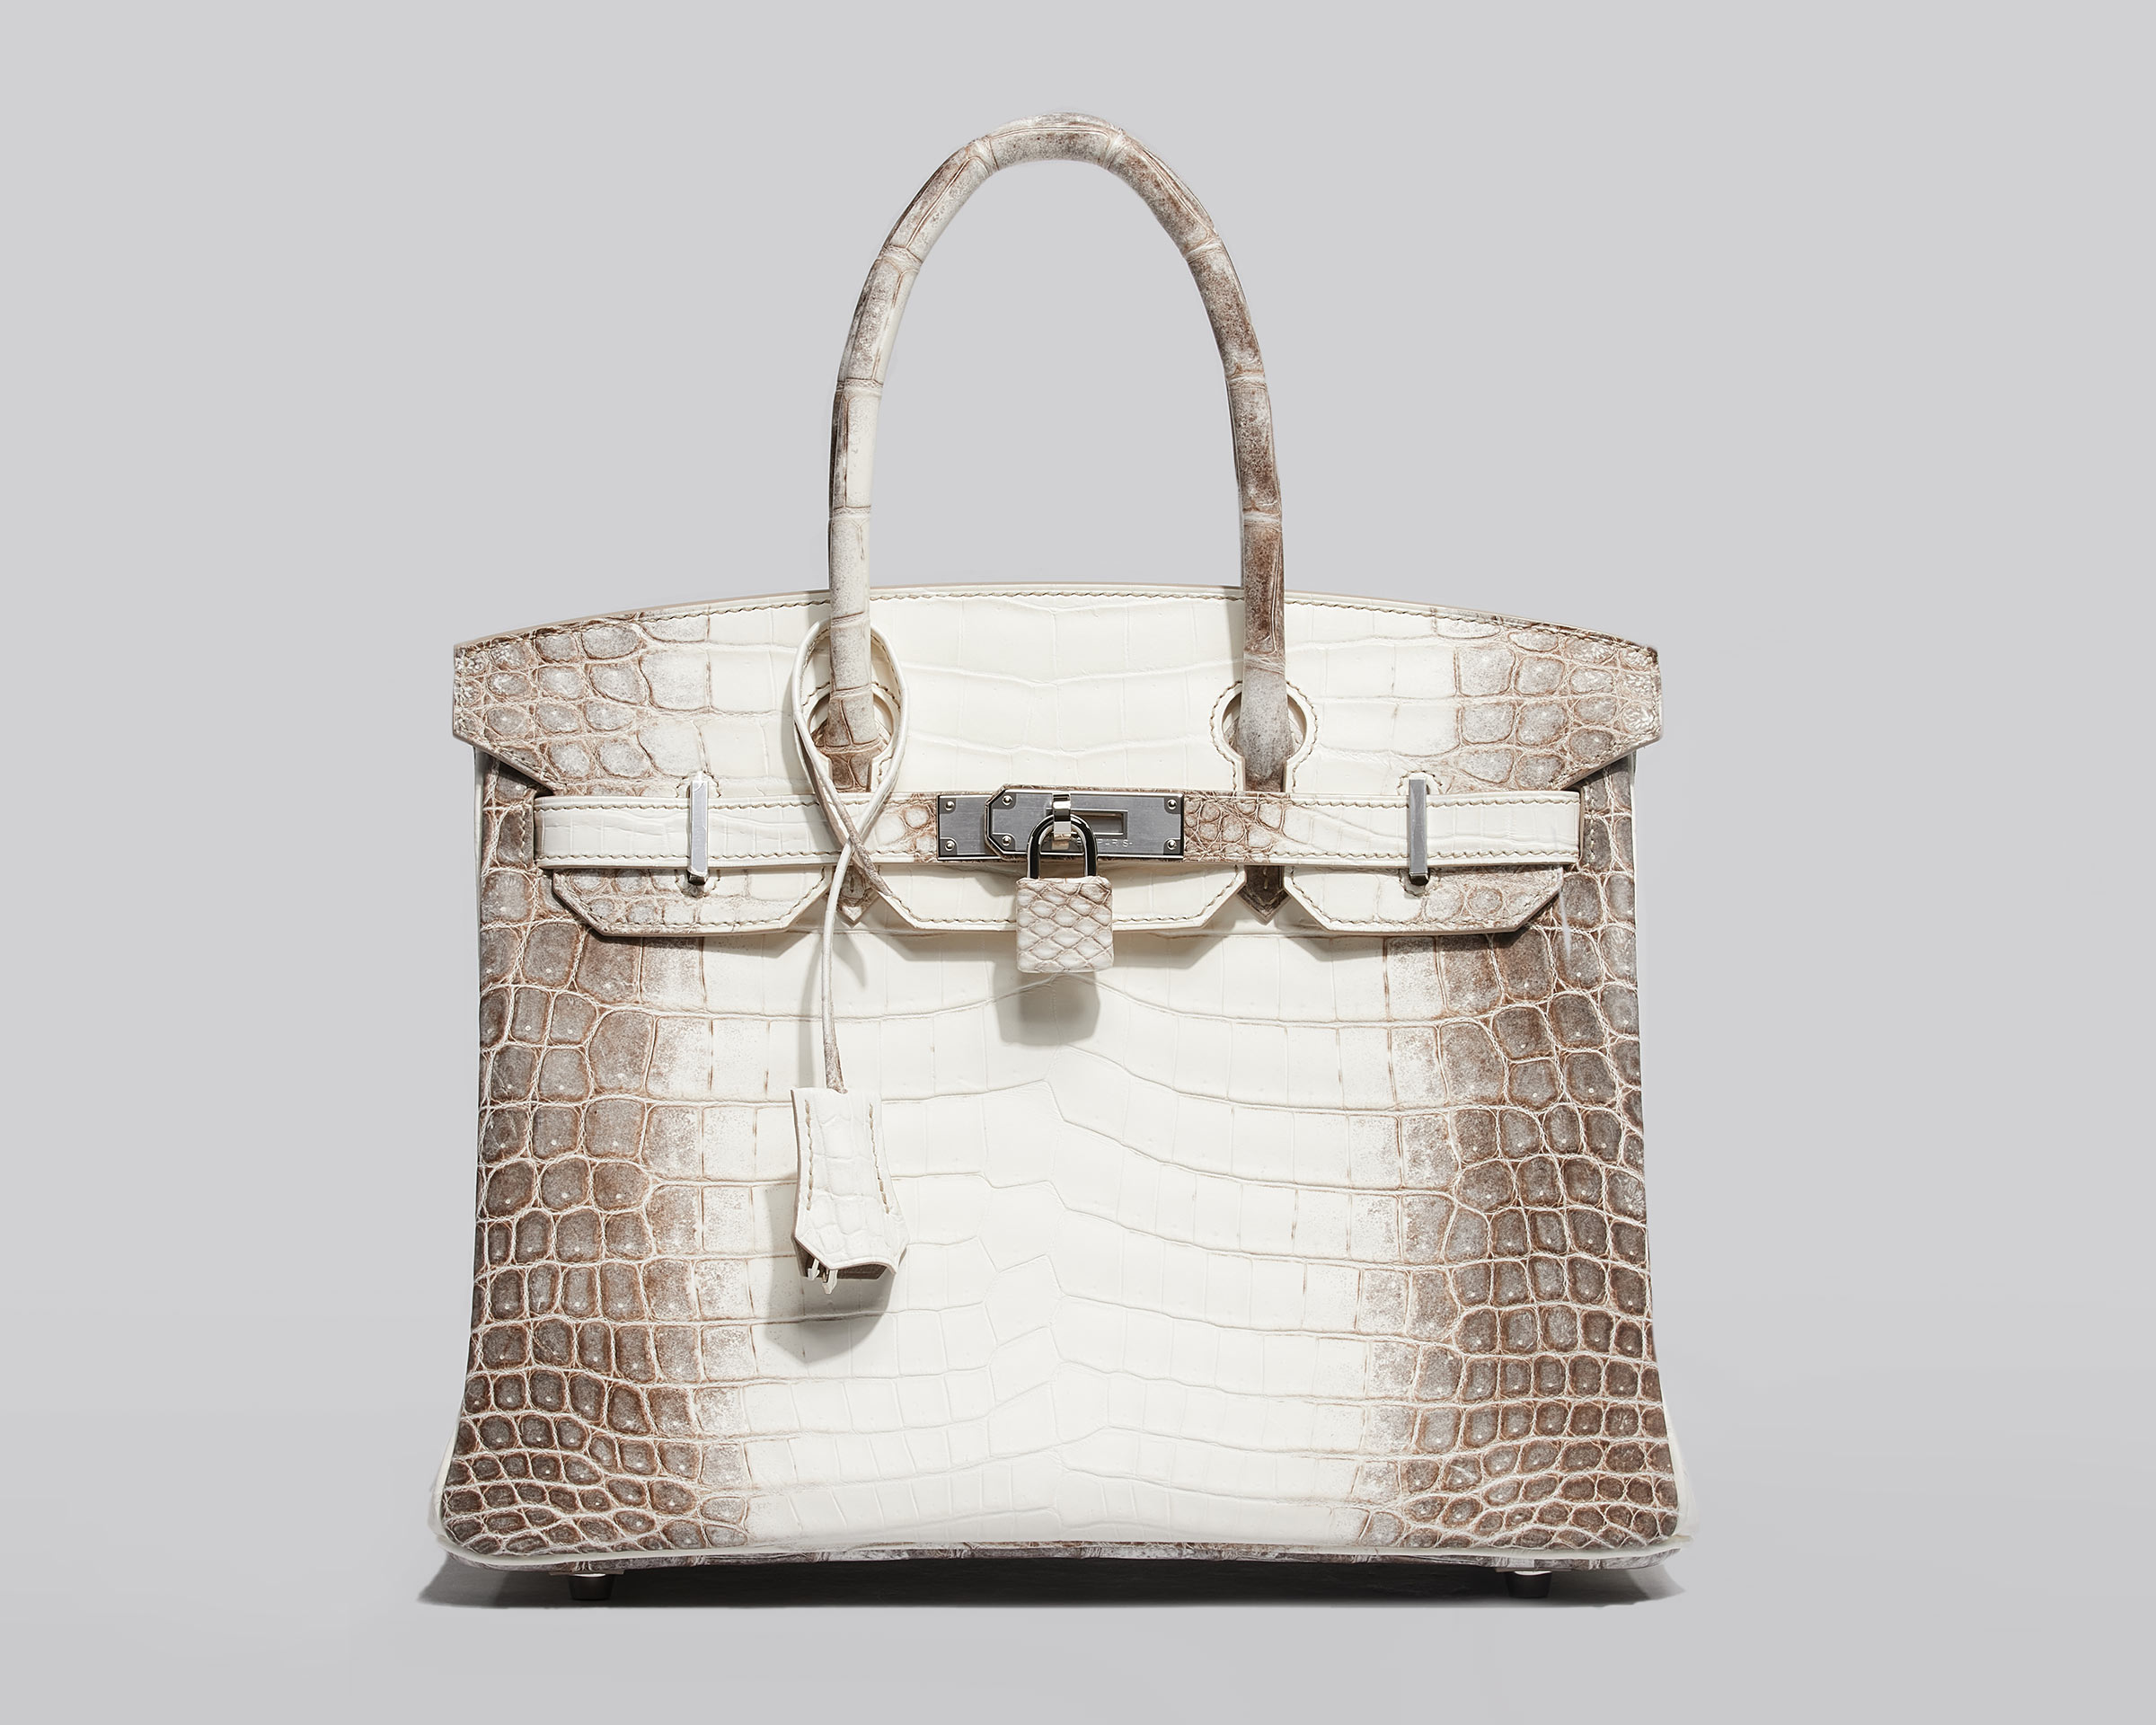 What You Need to Know About Authenticating the Birkin - Academy by